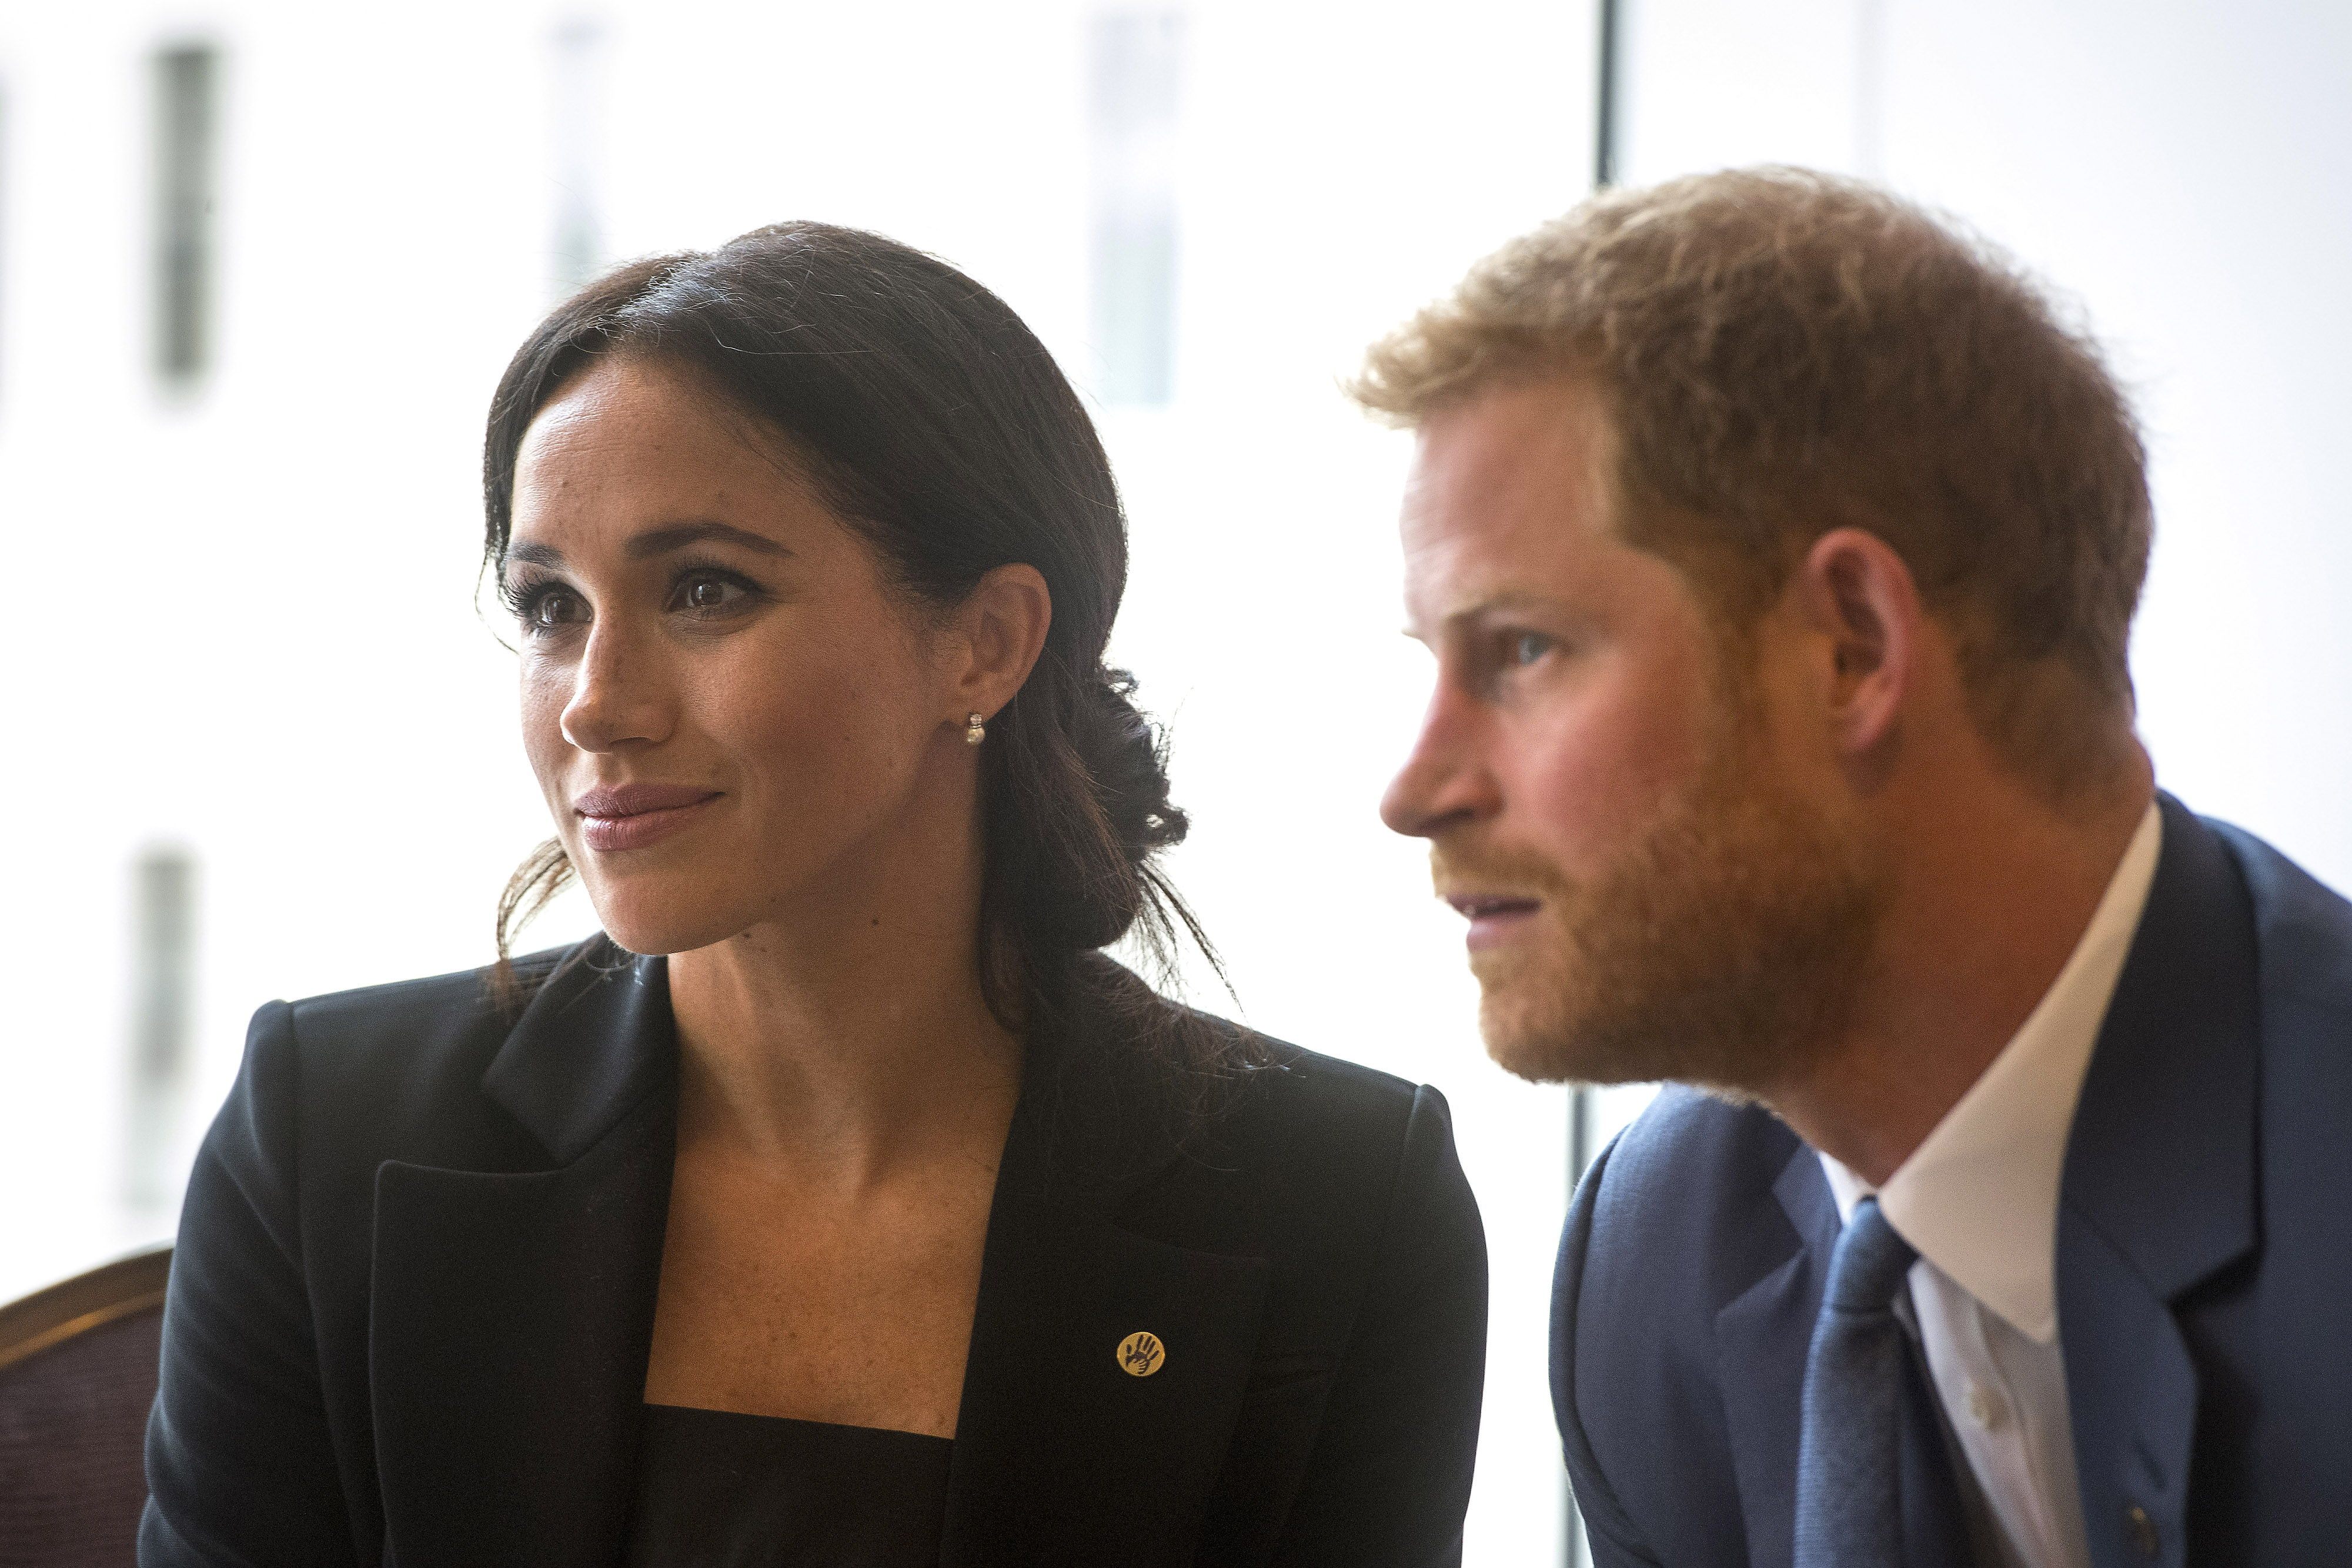 Prince Harry and Meghan Markle in London in 2018 | Source: Getty Images